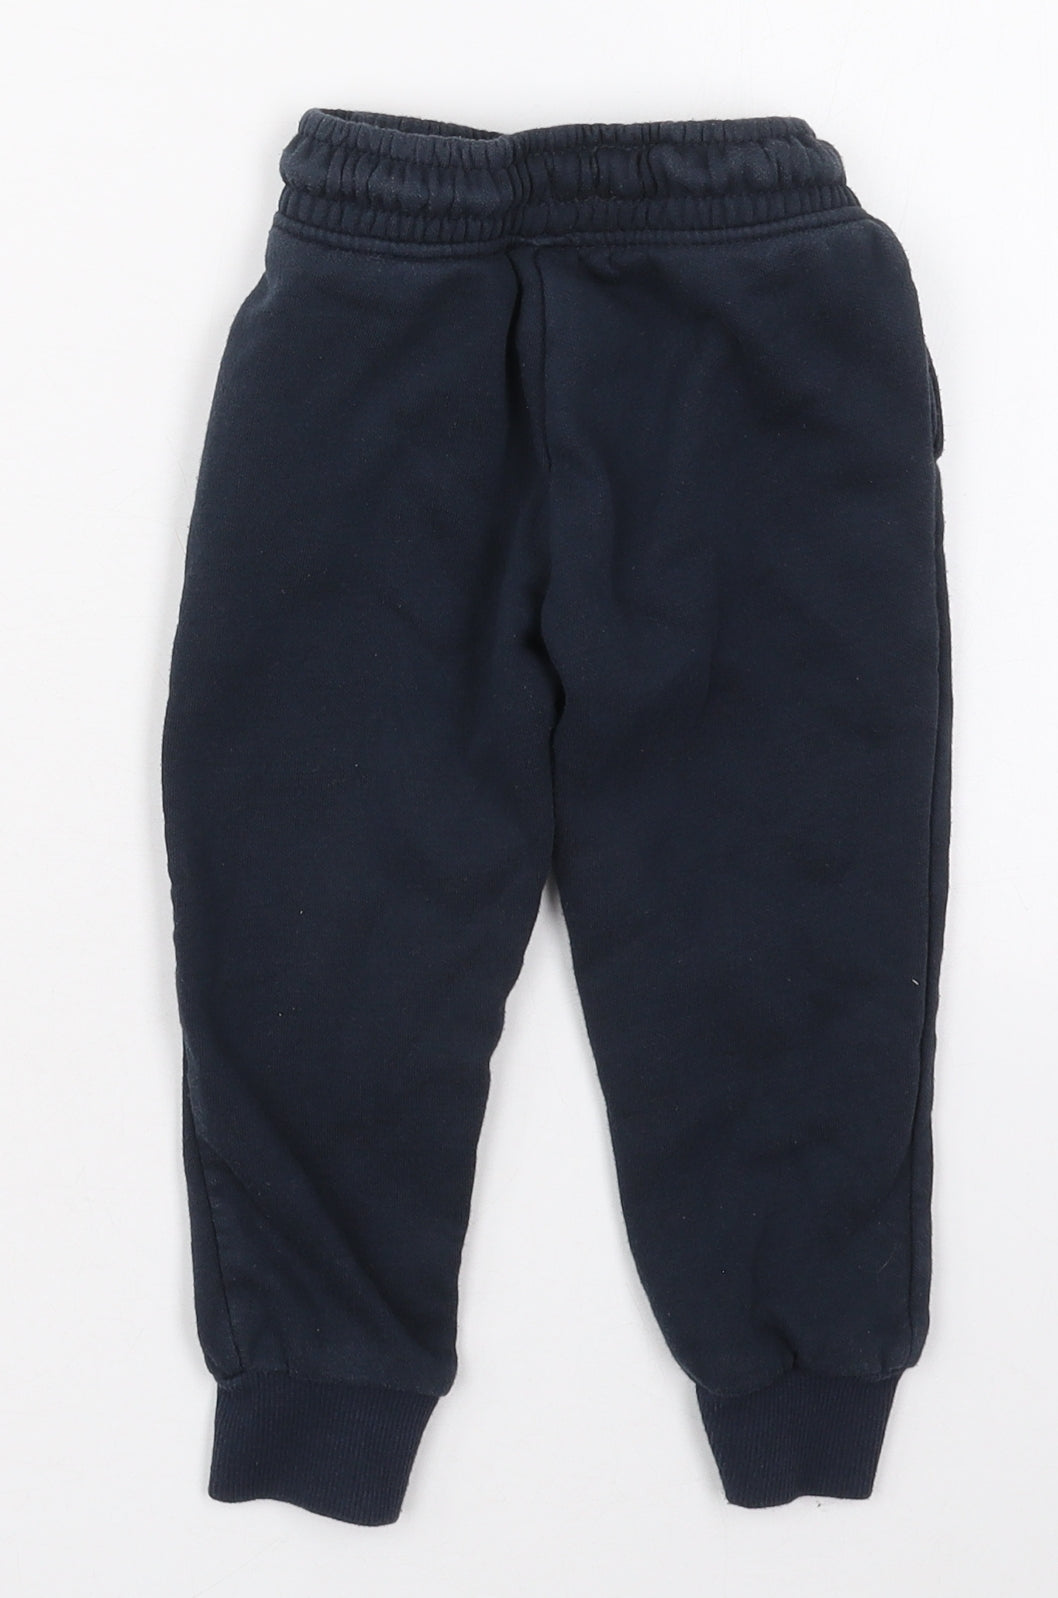 Dunnes Boys Blue  Cotton Sweatpants Trousers Size 3 Years  Regular Drawstring